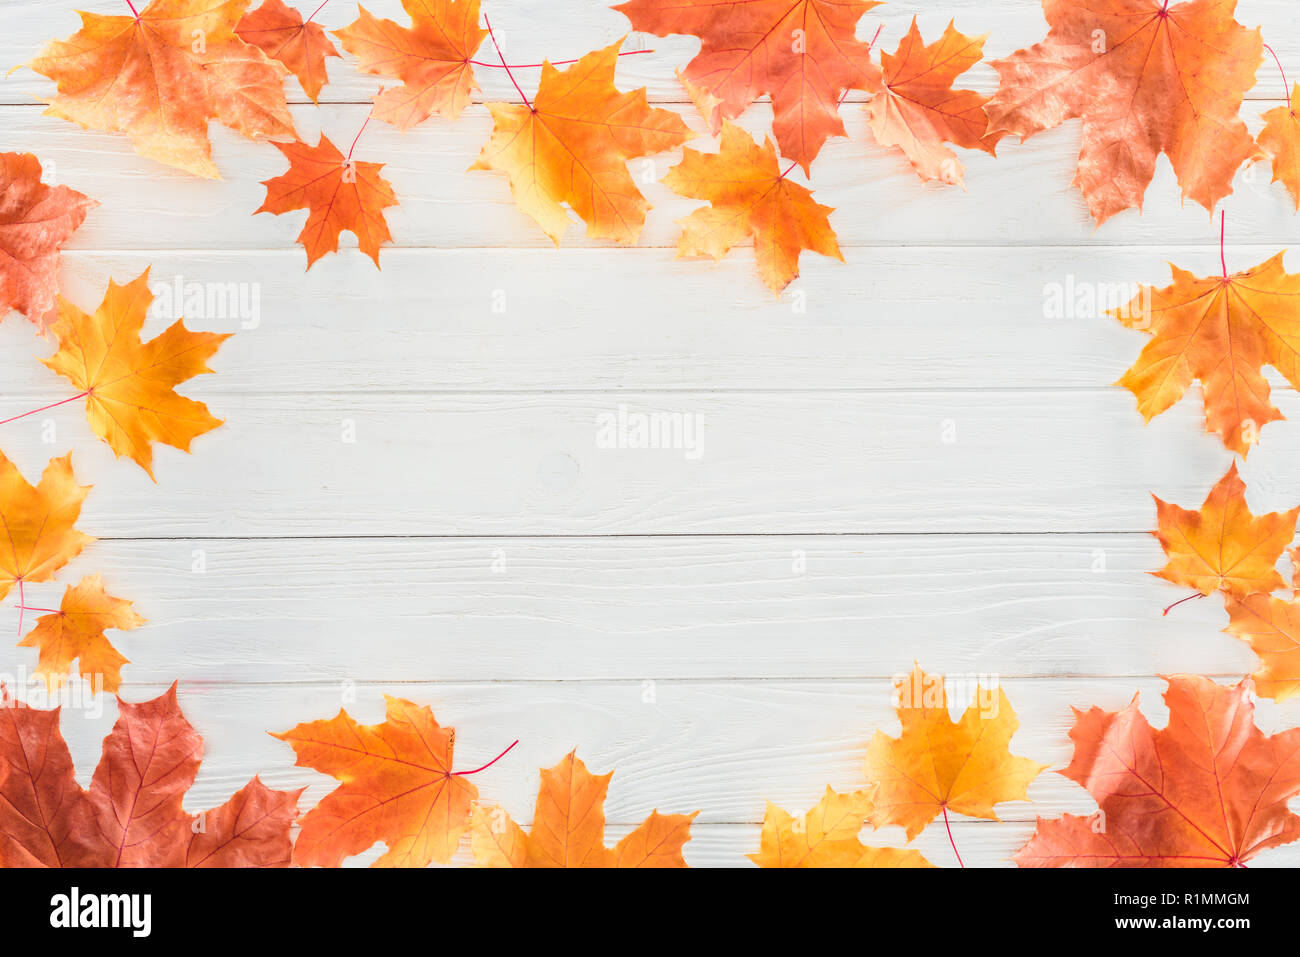 top view of frame of orange autumnal maple leaves on wooden surface Stock Photo